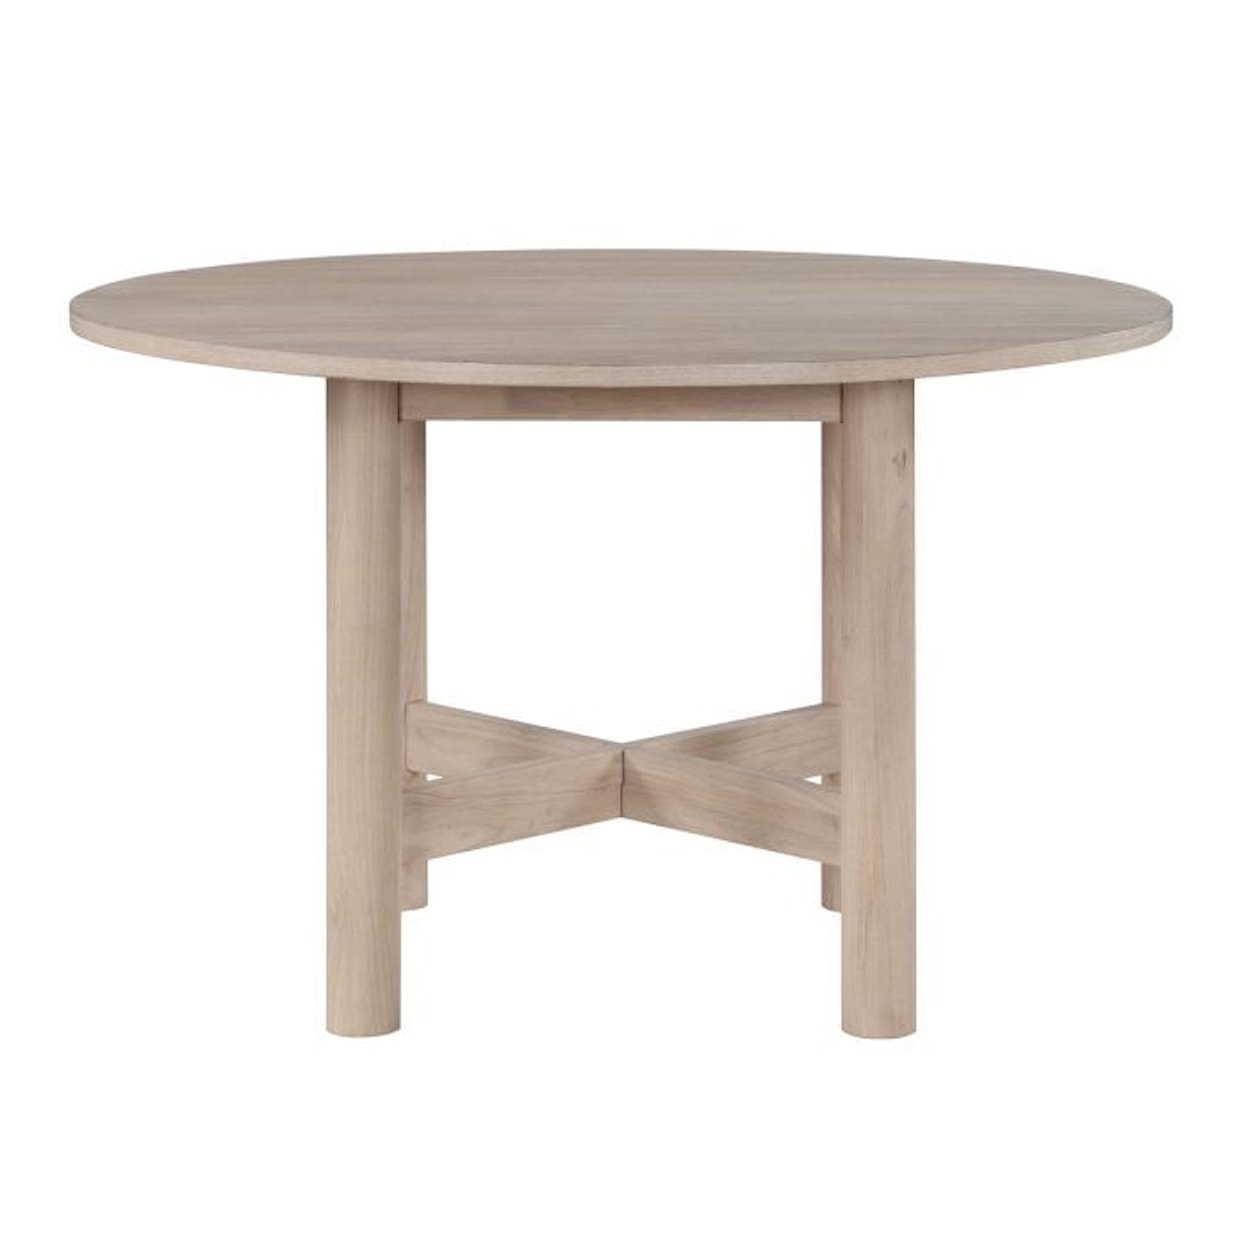 Steve Silver Gabby Round Dining Table